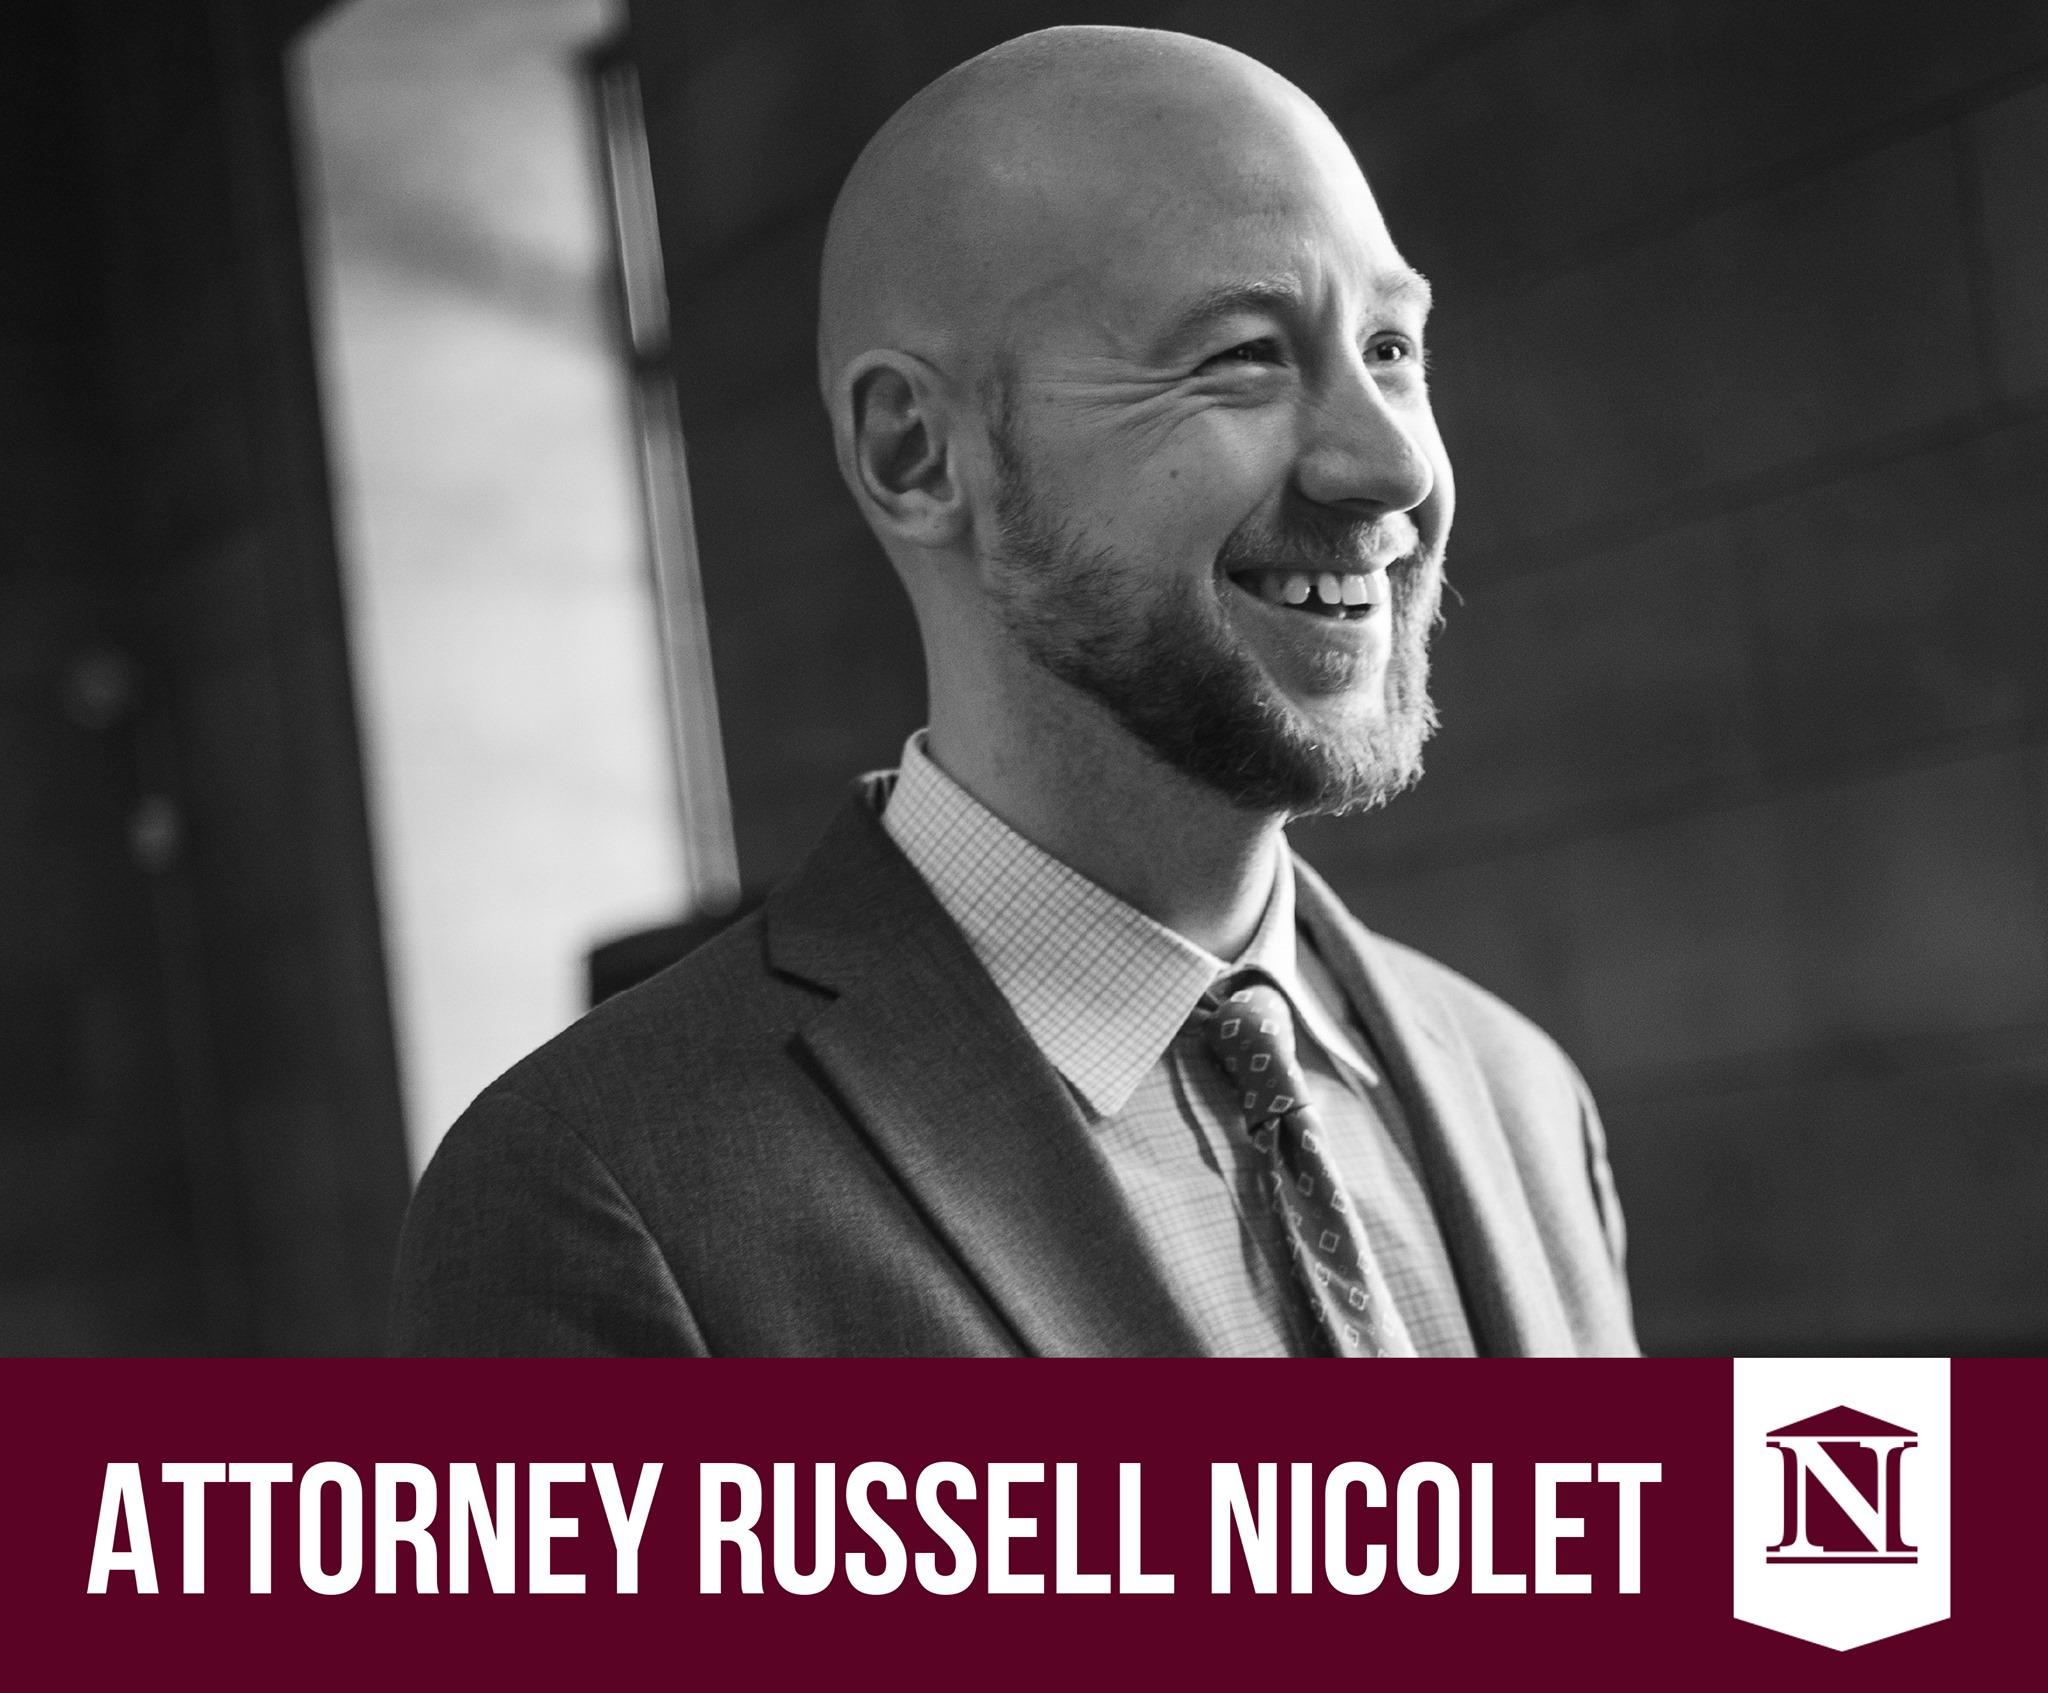 Russell Nicolet has always been focused on helping people through difficult situations. He became an attorney and has integrated this personal philosophy into his practice so that he could help people through some of the most stressful situations they will face in life.